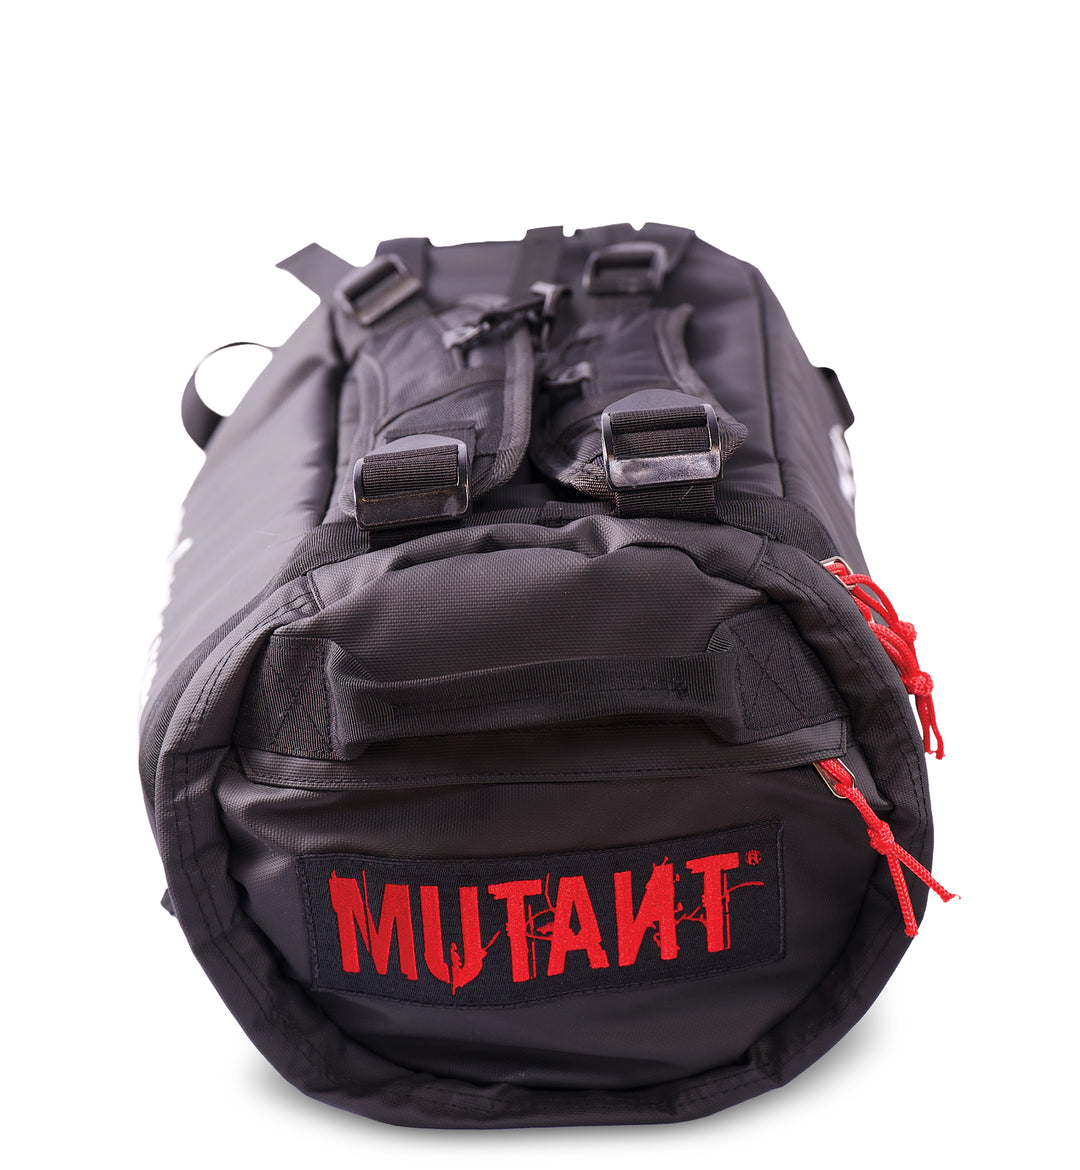 The top view of the black Military Top Load Duffel Backpack highlighting the 'MUTANT' logo in red, set against a white background.